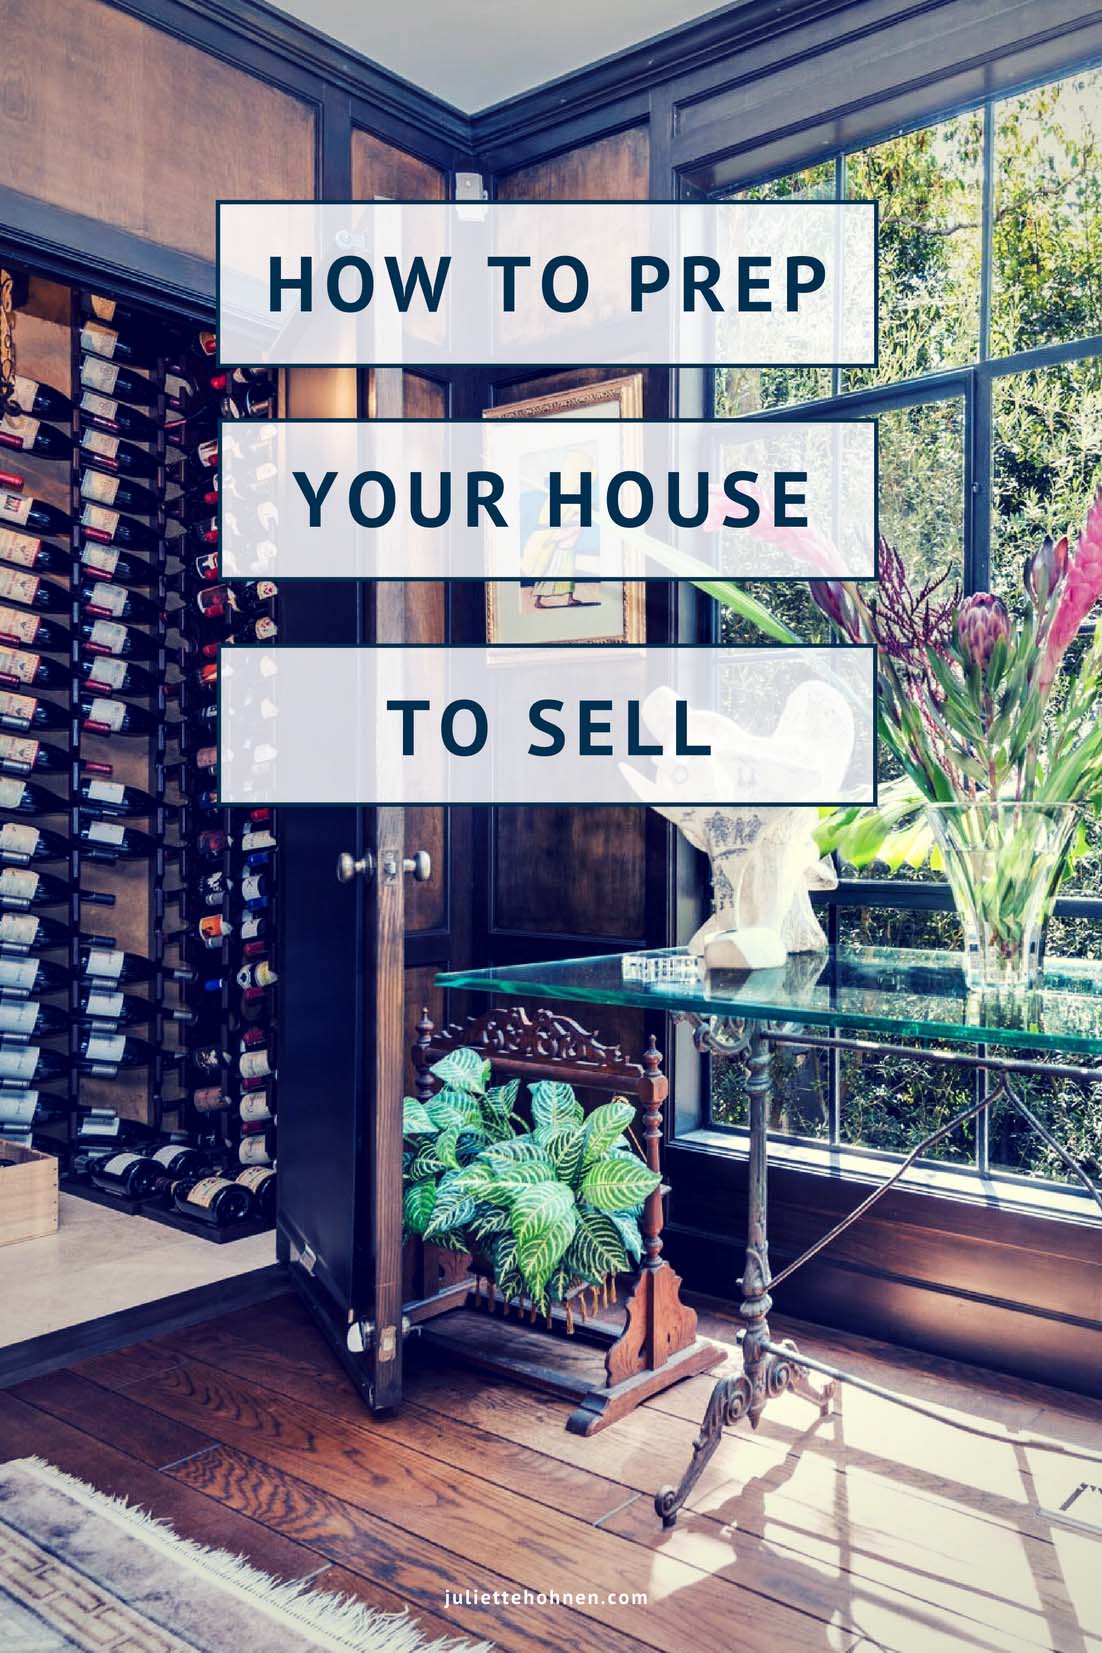 How to Prep Your House to Sell